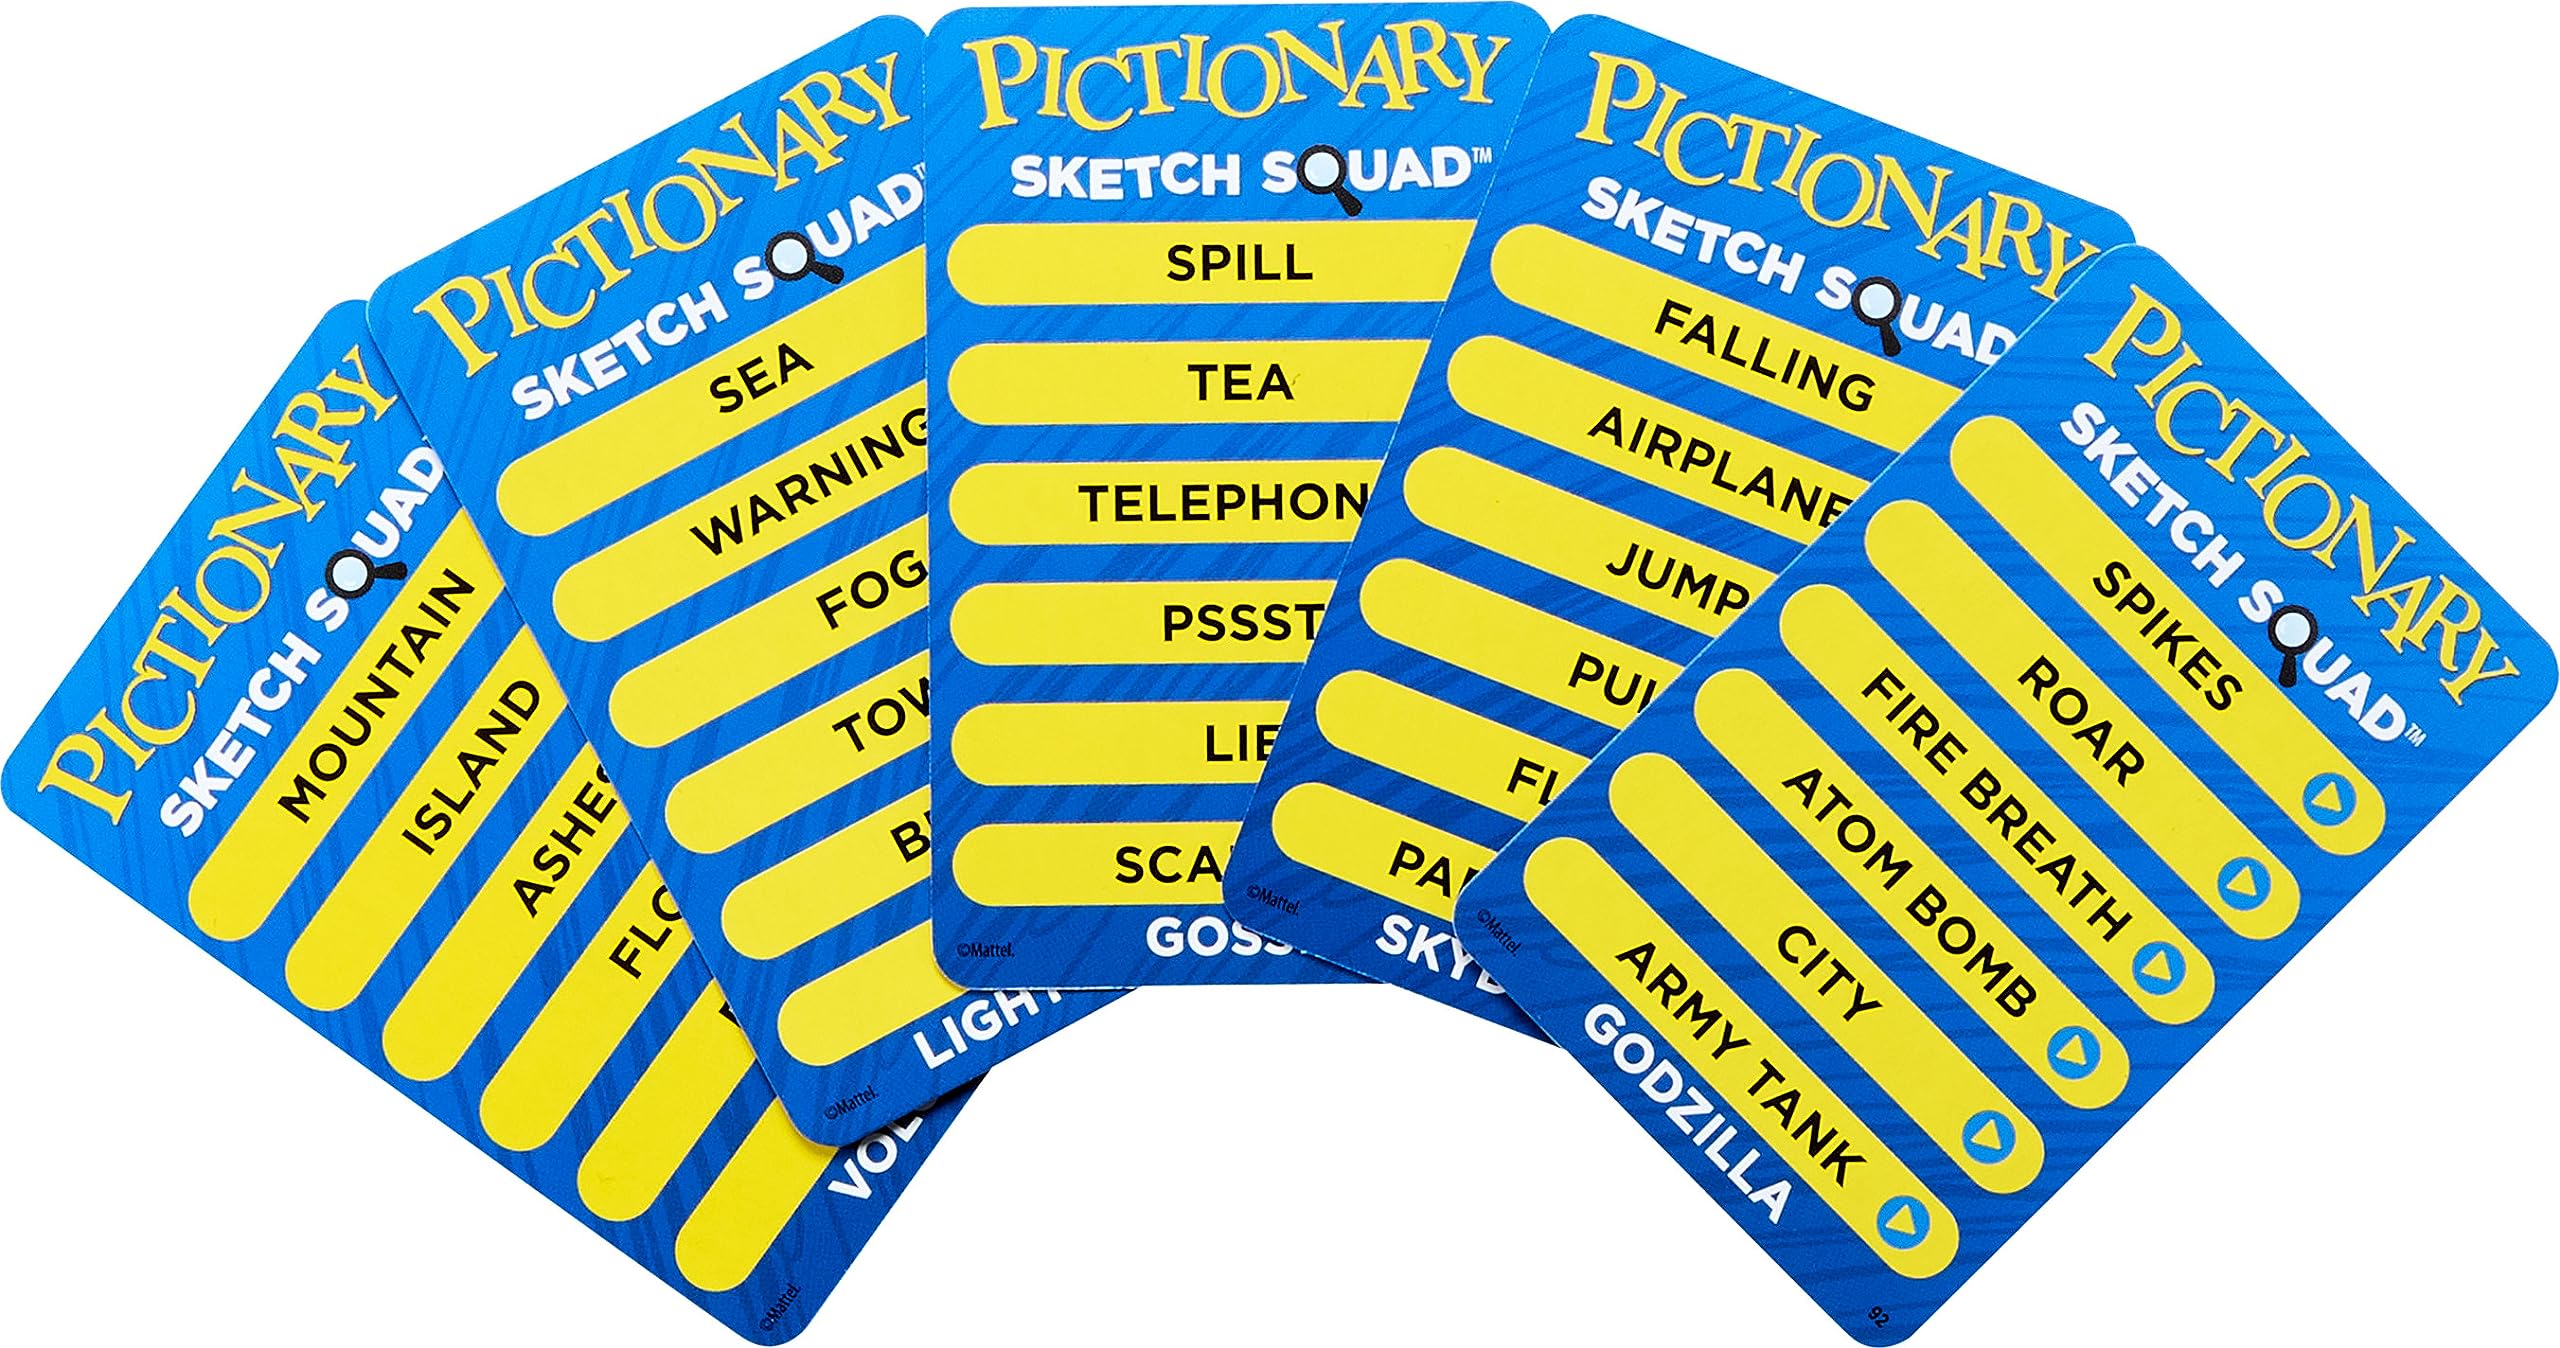 Mattel Games Pictionary Sketch Squad Cooperative Party Game for Adults, Teens and Game Night with Clues Case for 2-6 Players